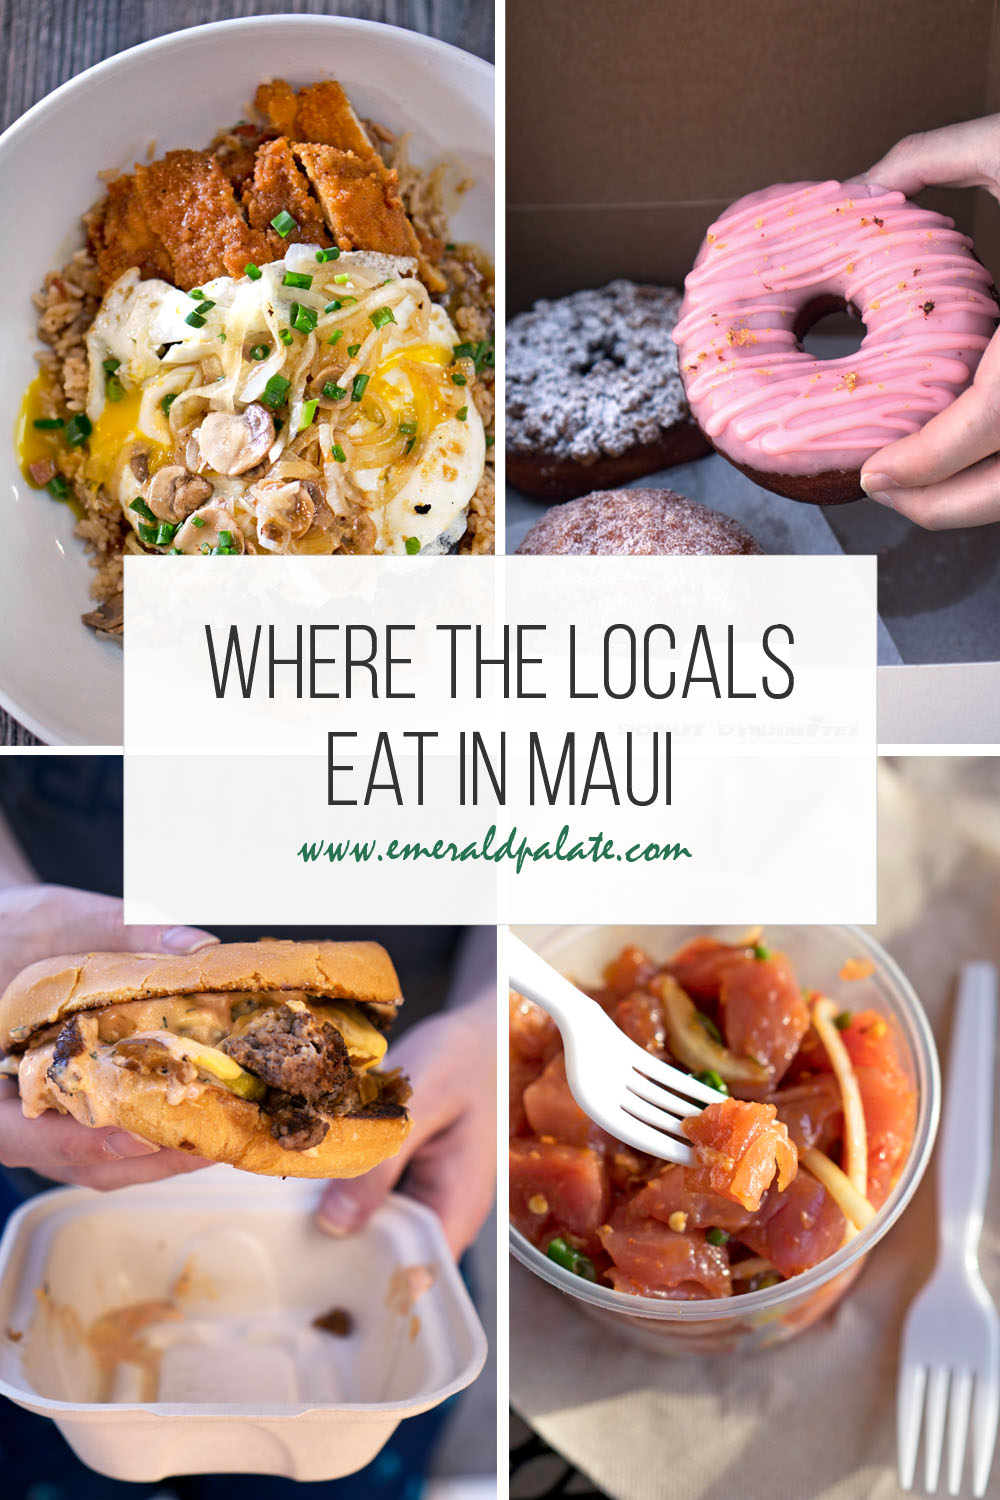 Wondering where do the locals eat in Maui? Use this guide to the best restaurants in Maui. It include both Maui cheap eats and Maui fine dining worth the splurge. If you want to support small businesses in Maui and eat local Hawaiian food, here are the must eats in Maui with all the best Maui food!